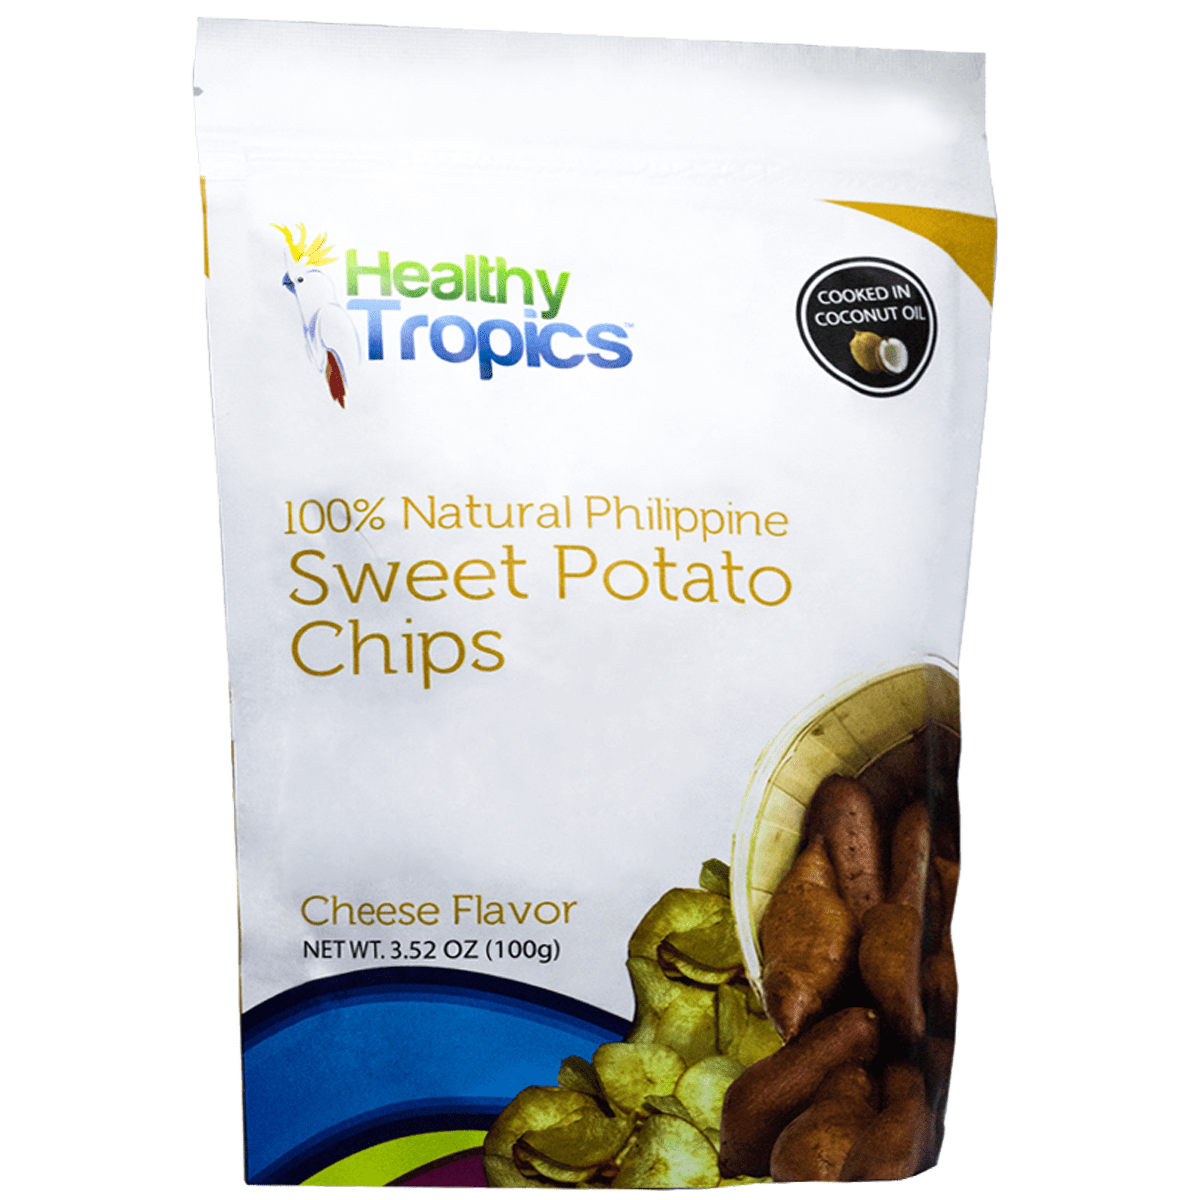 Healthy Tropics 100% Natural Philippine Sweet Potato Chips – Cheese Flavor snacks, 100g